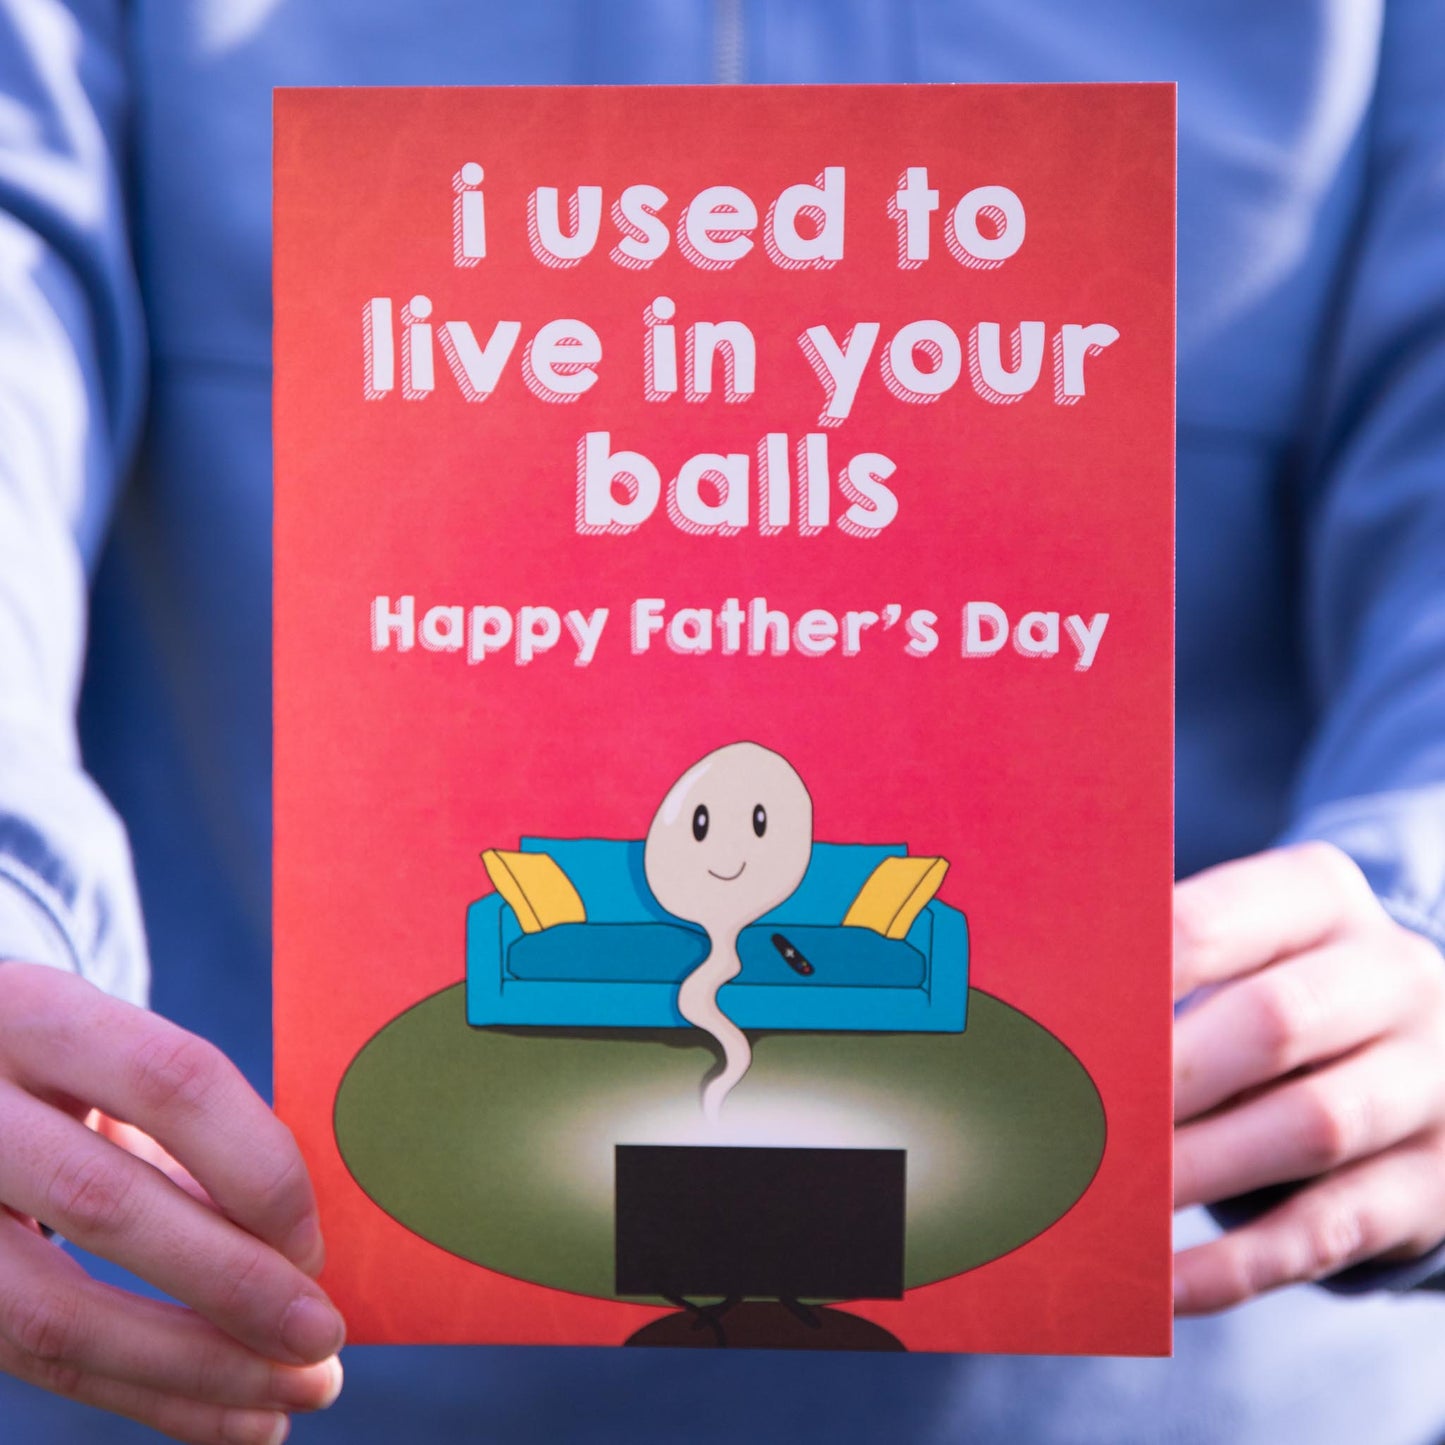 Lived in your balls